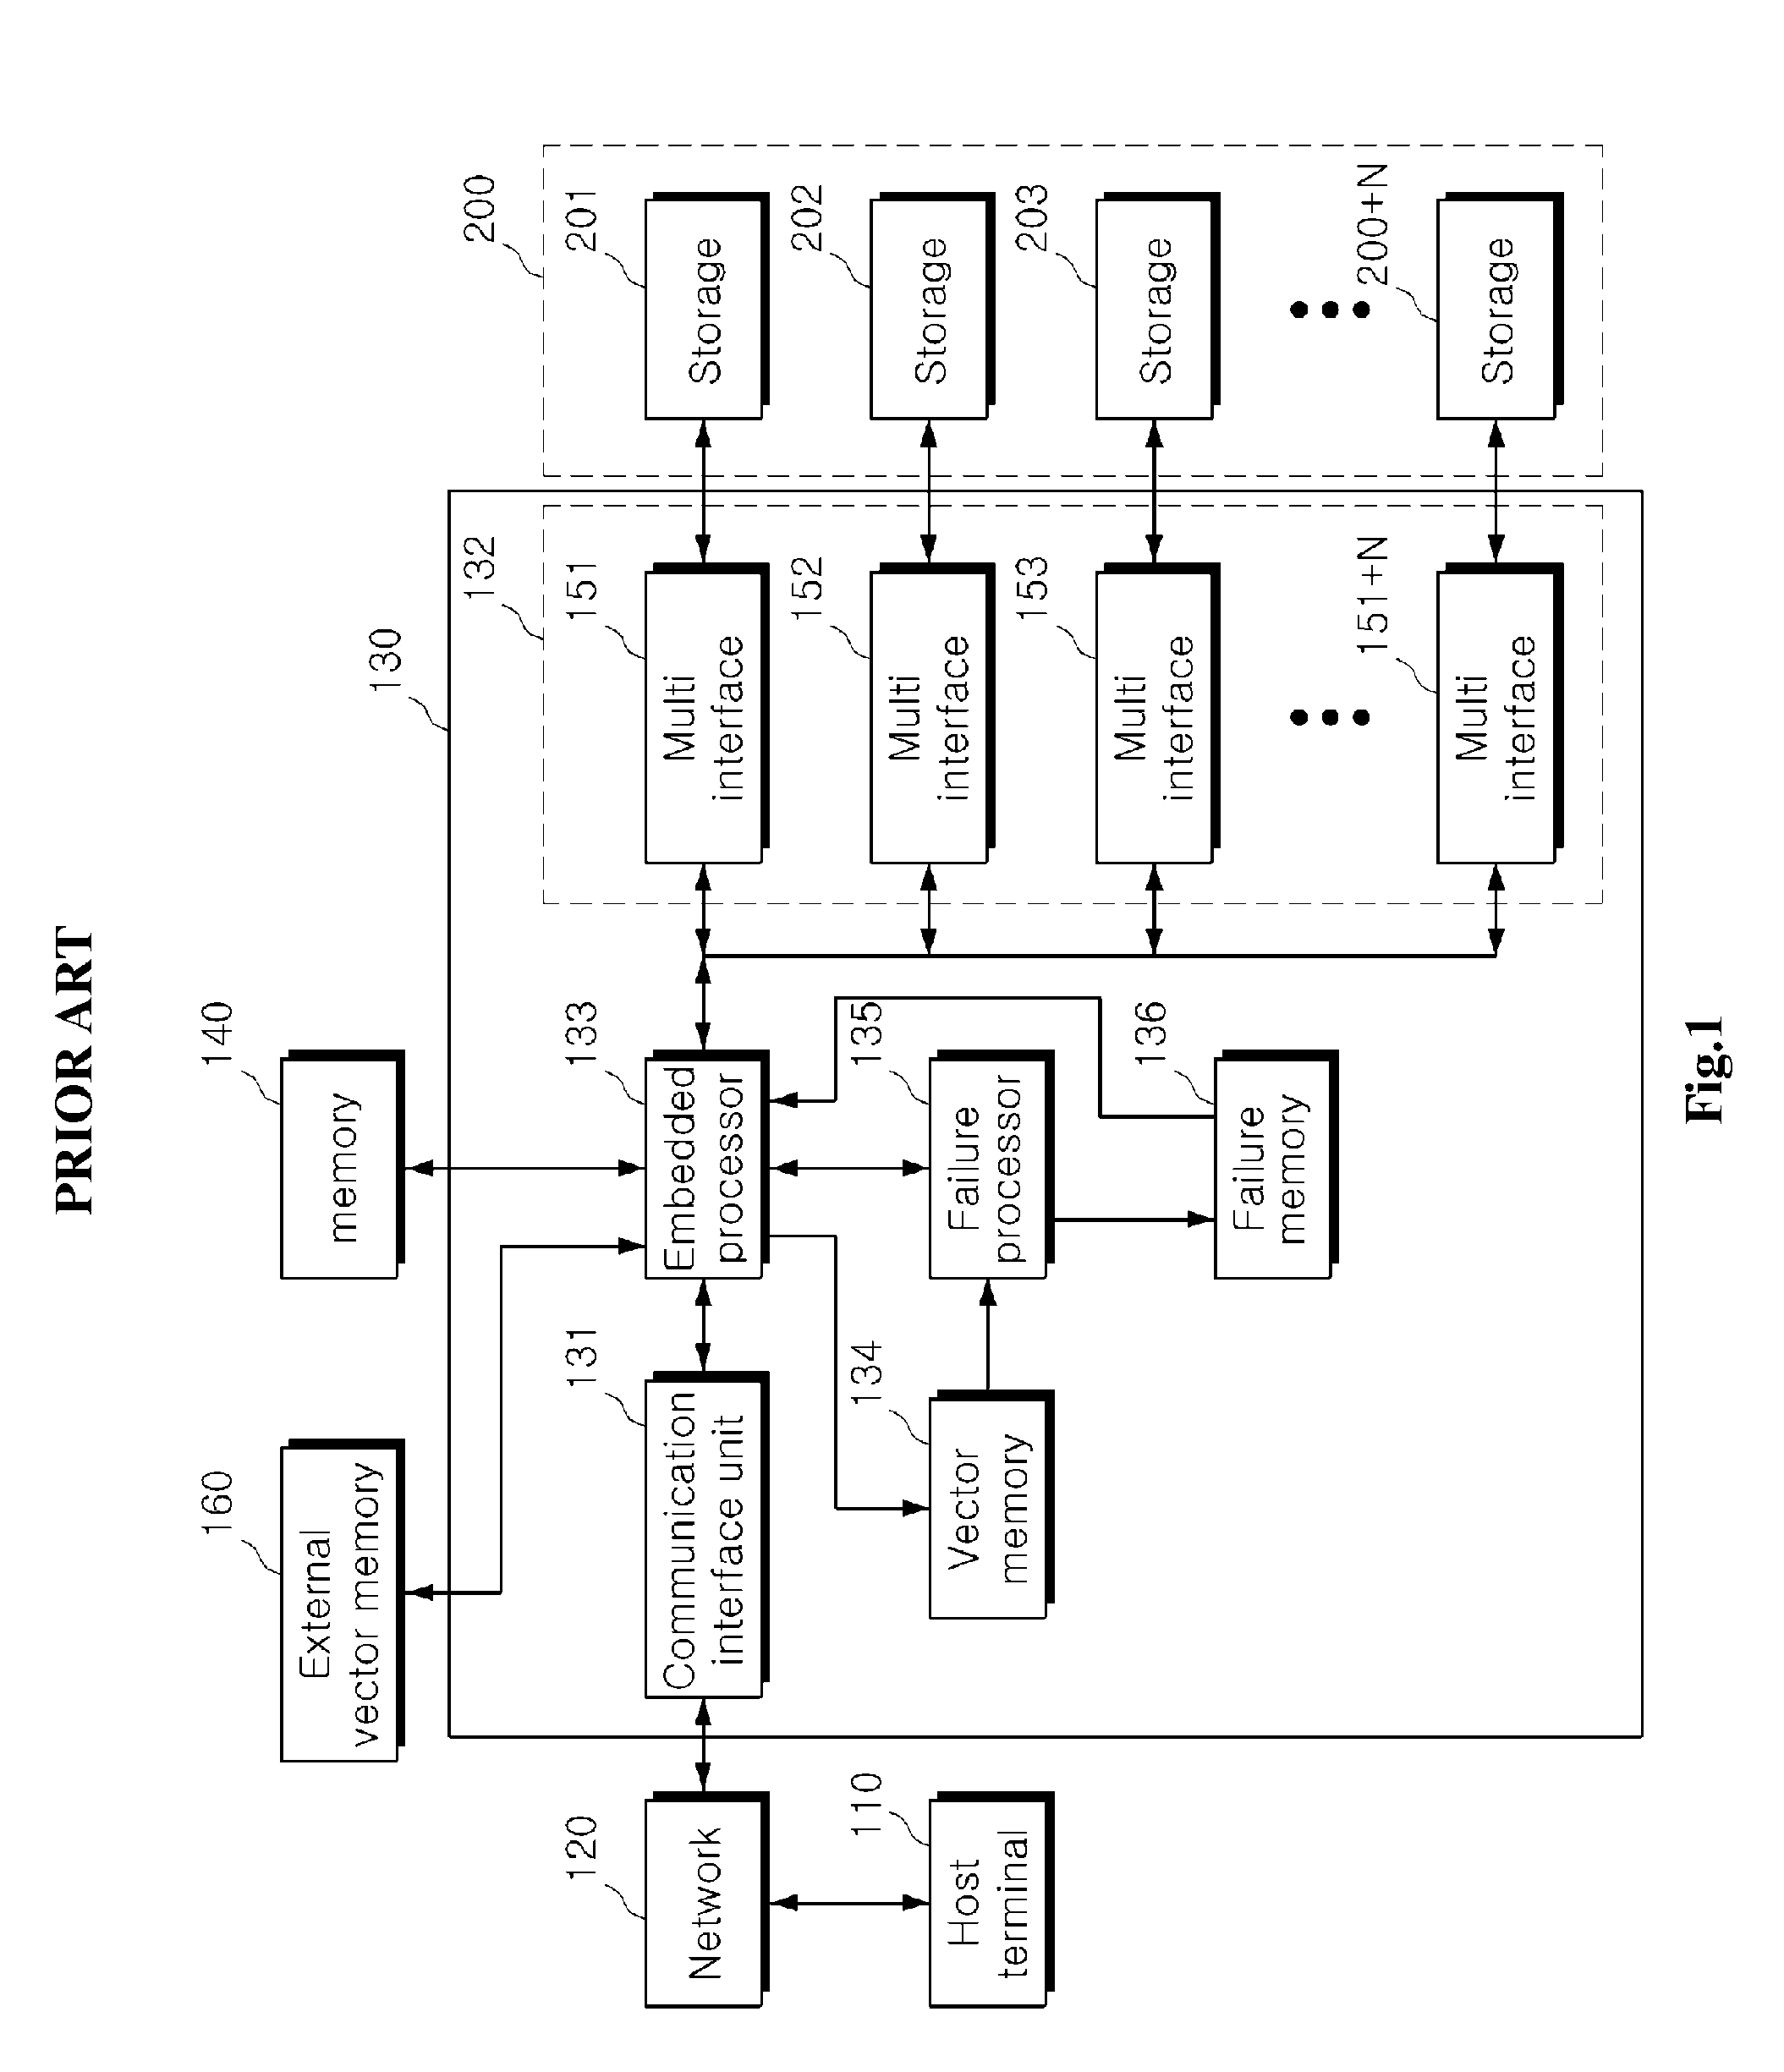 Storage interface apparatus for solid state drive tester